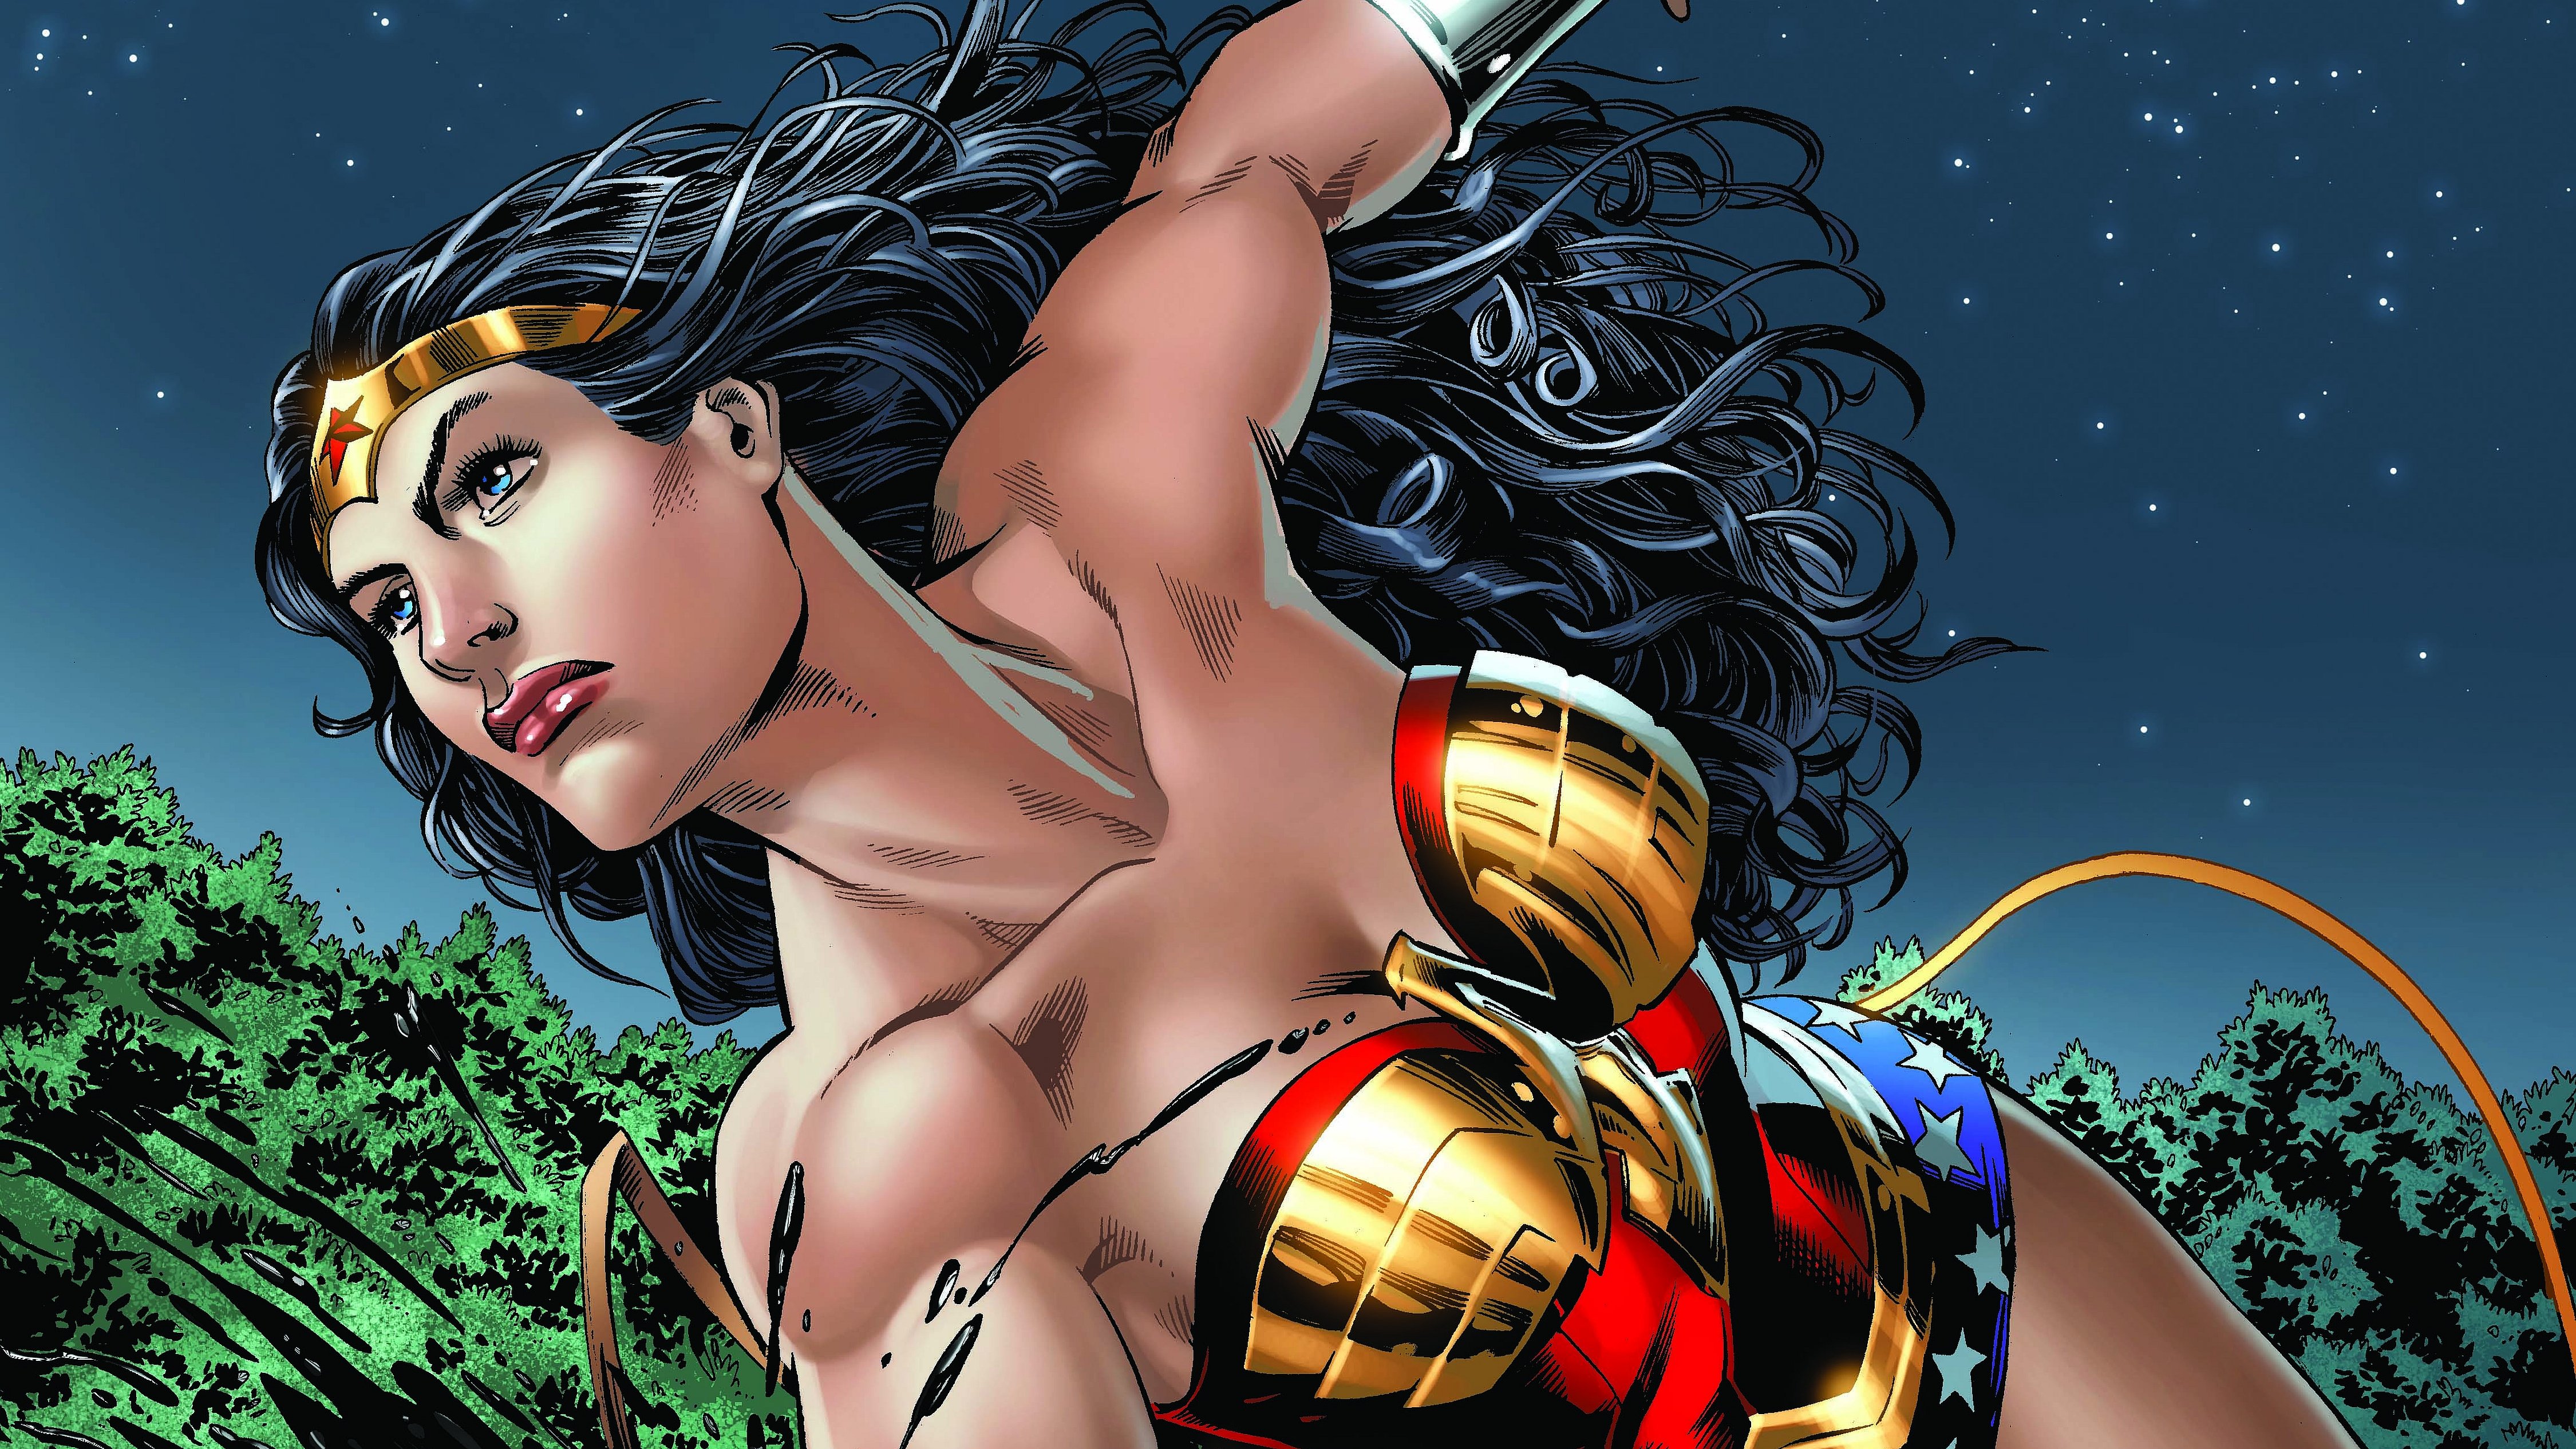 Wonder woman sexy pictures.